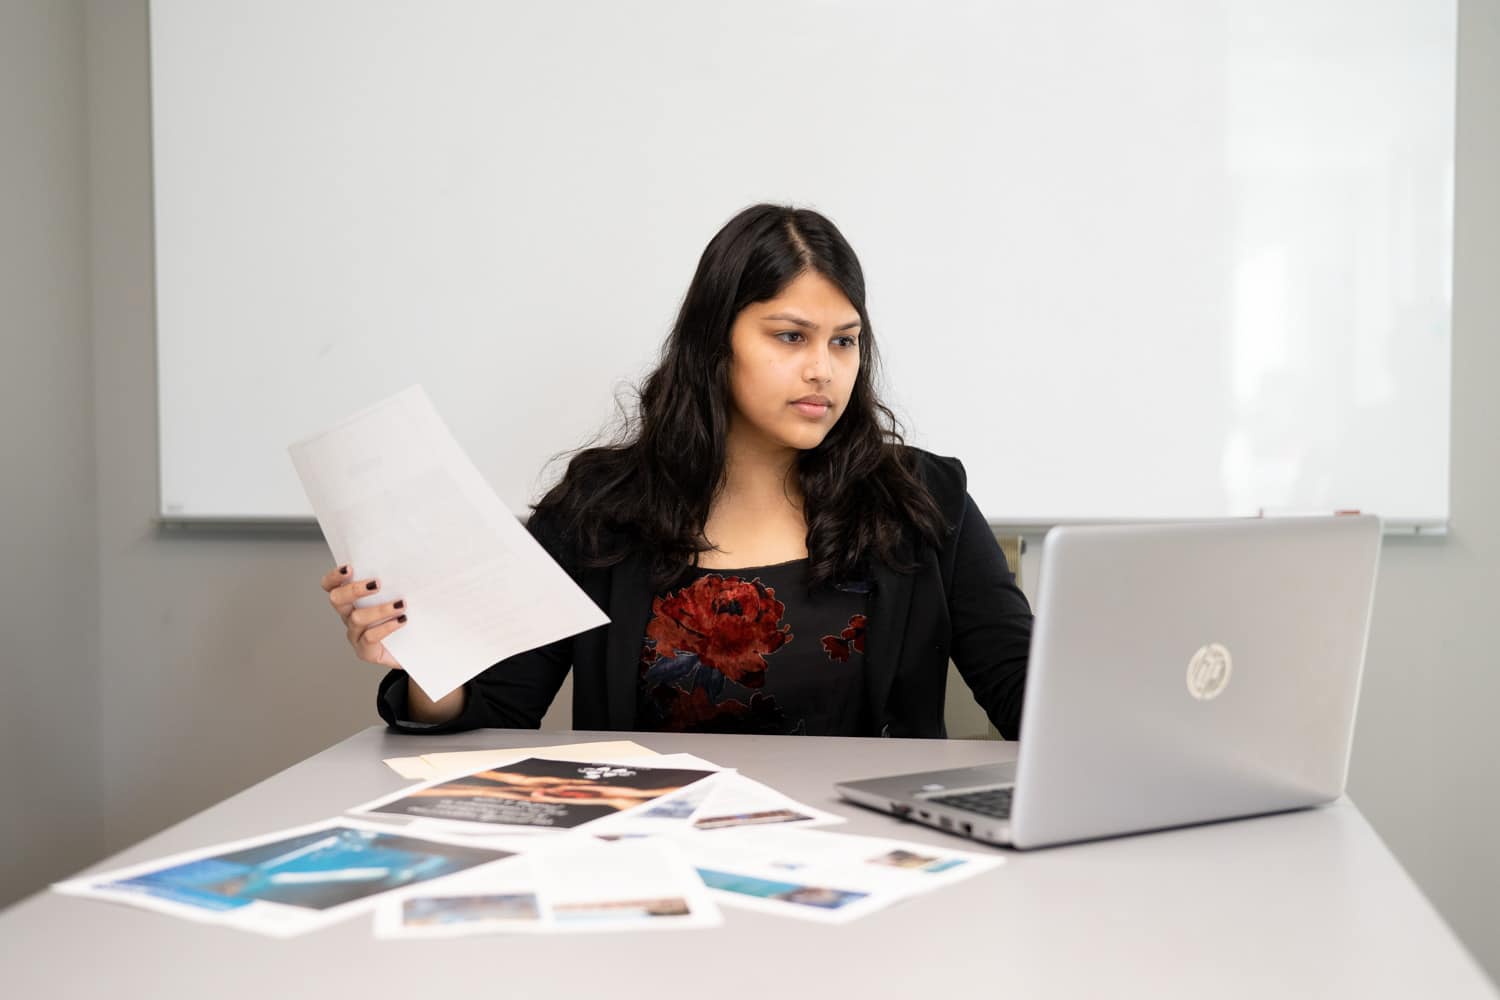  student holding paperwork while looking at macbook 